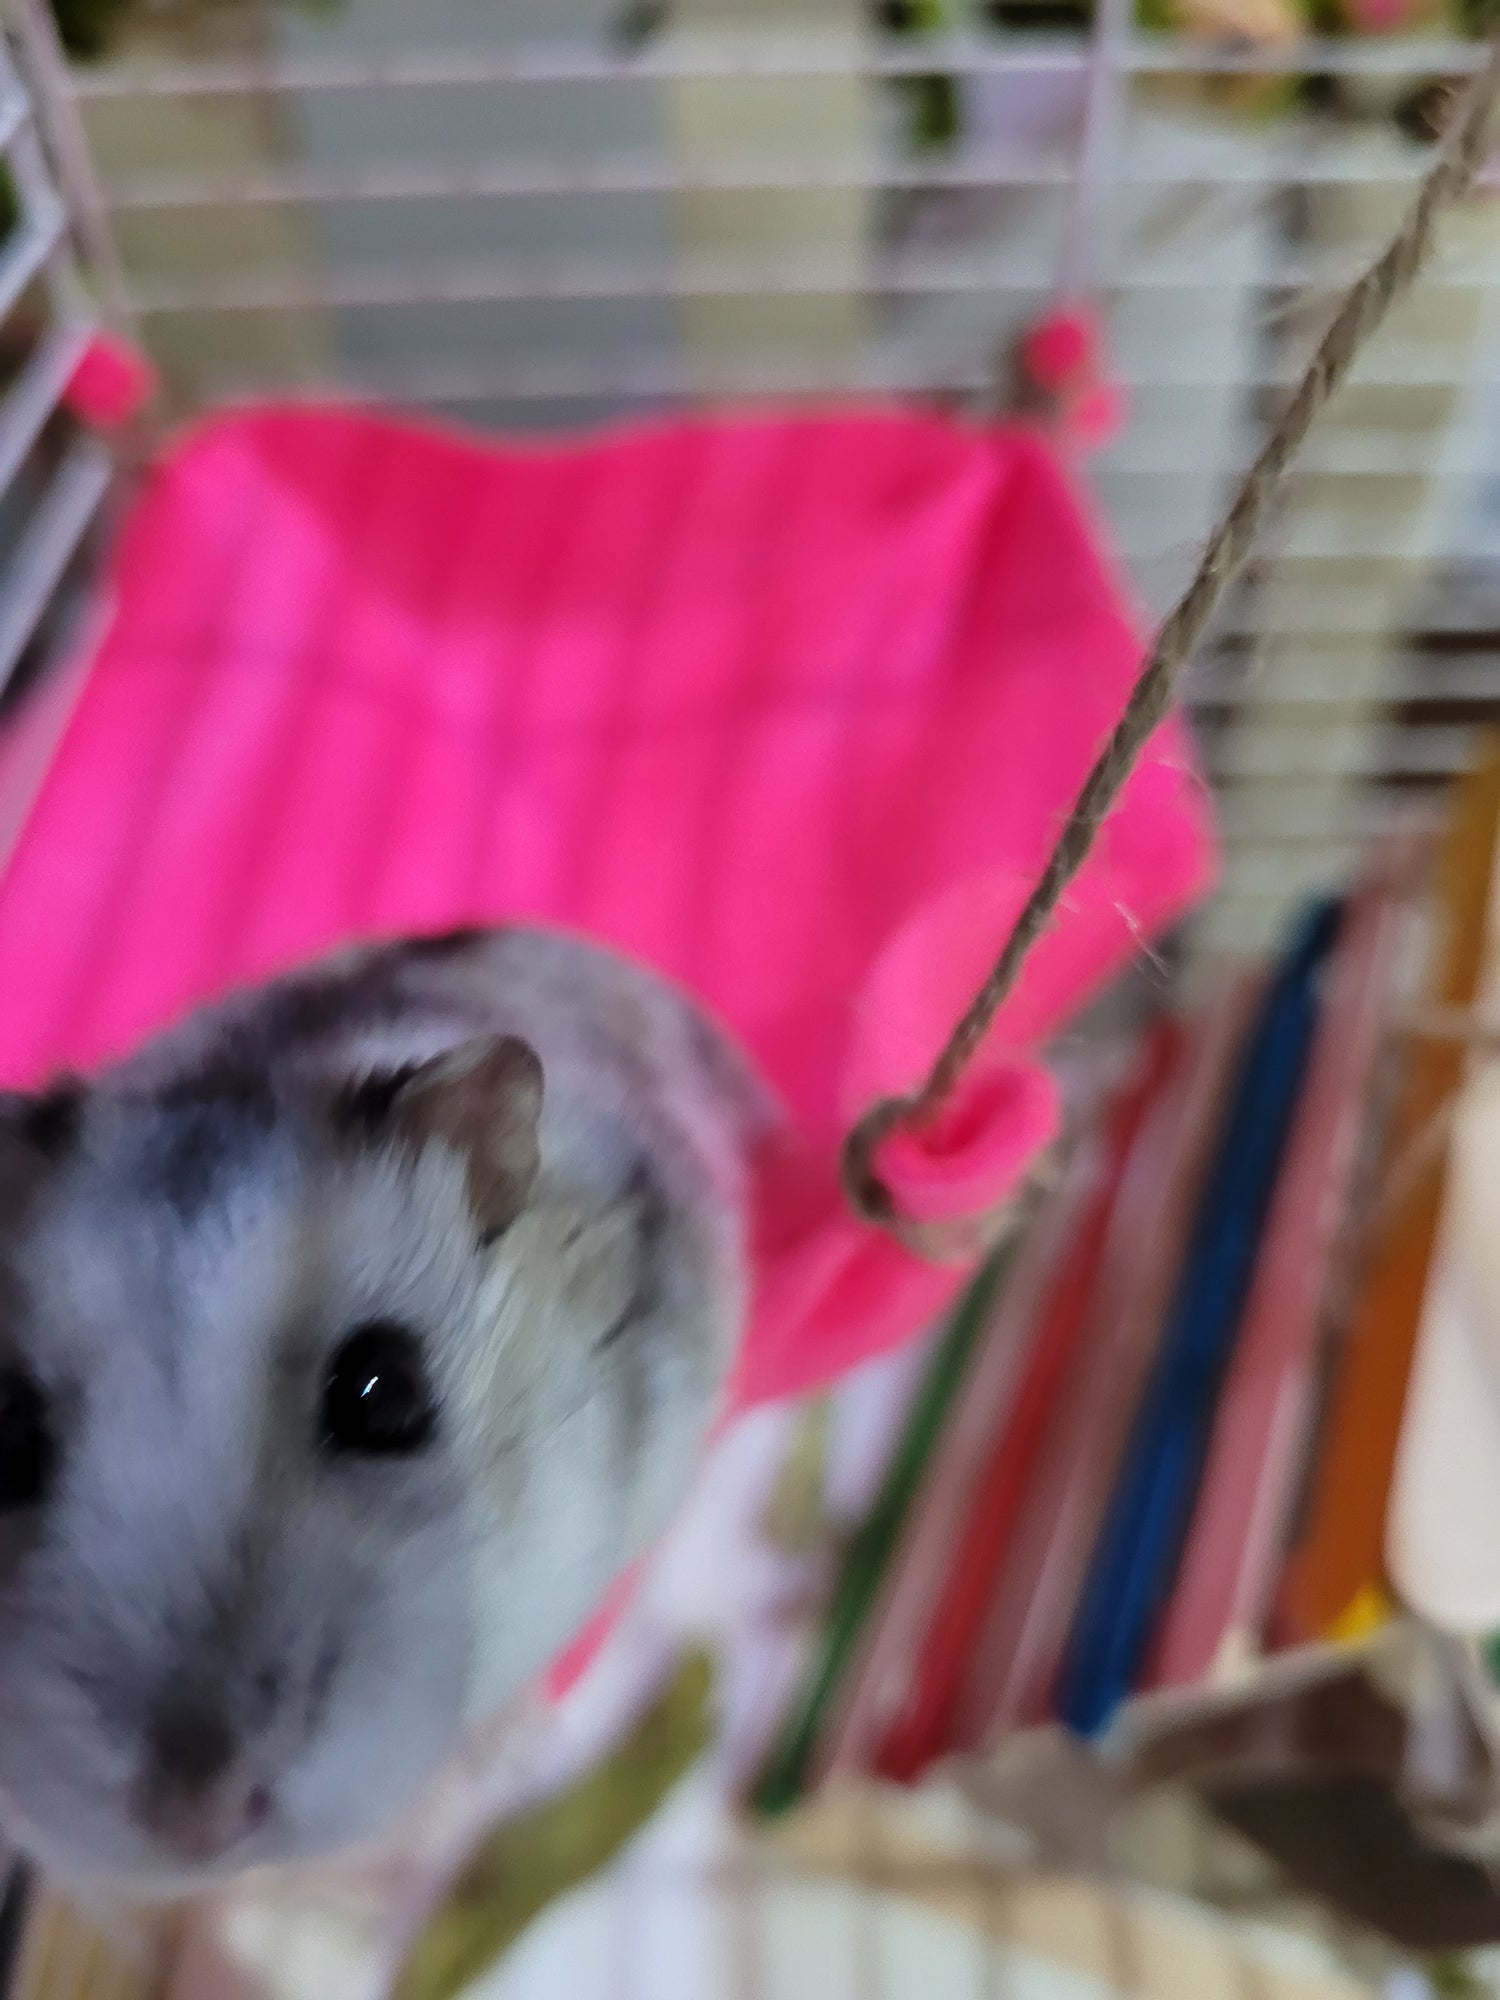 A winter white dwarf hamster called Flamey looking directly at the camera from a hamster hammock